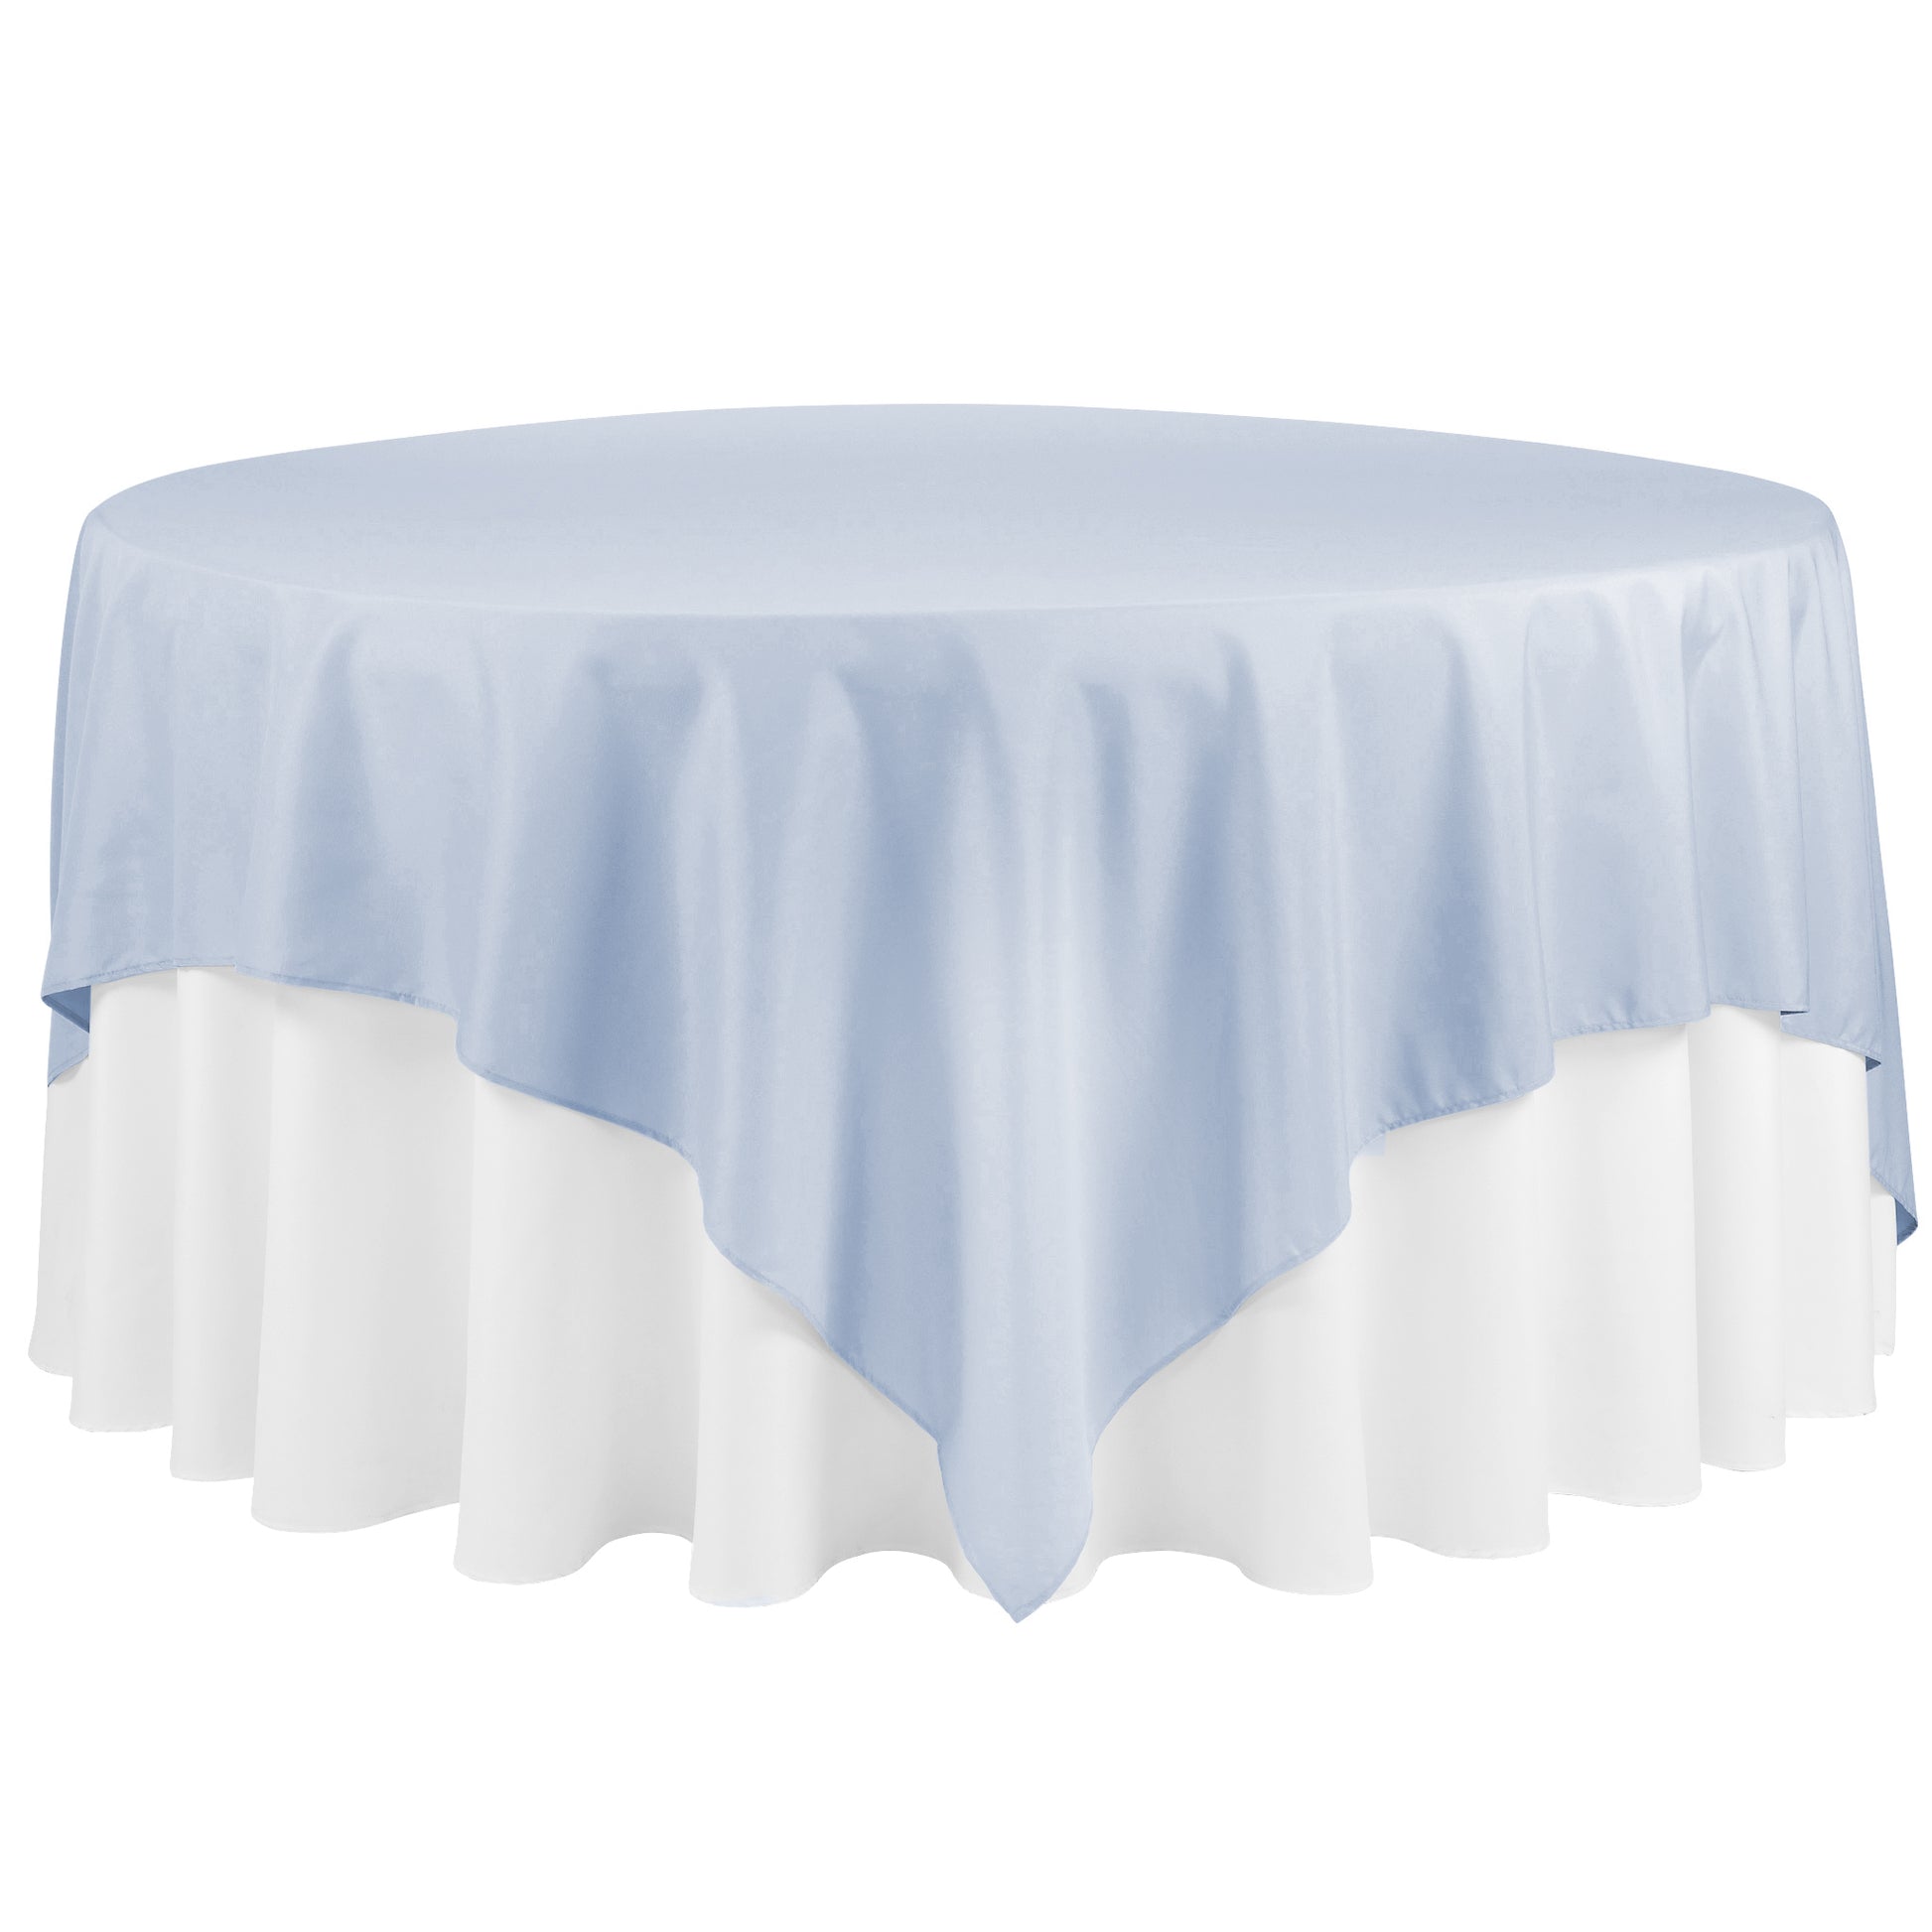 Polyester Square 90"x90" Overlay/Tablecloth - Dusty Blue - CV Linens